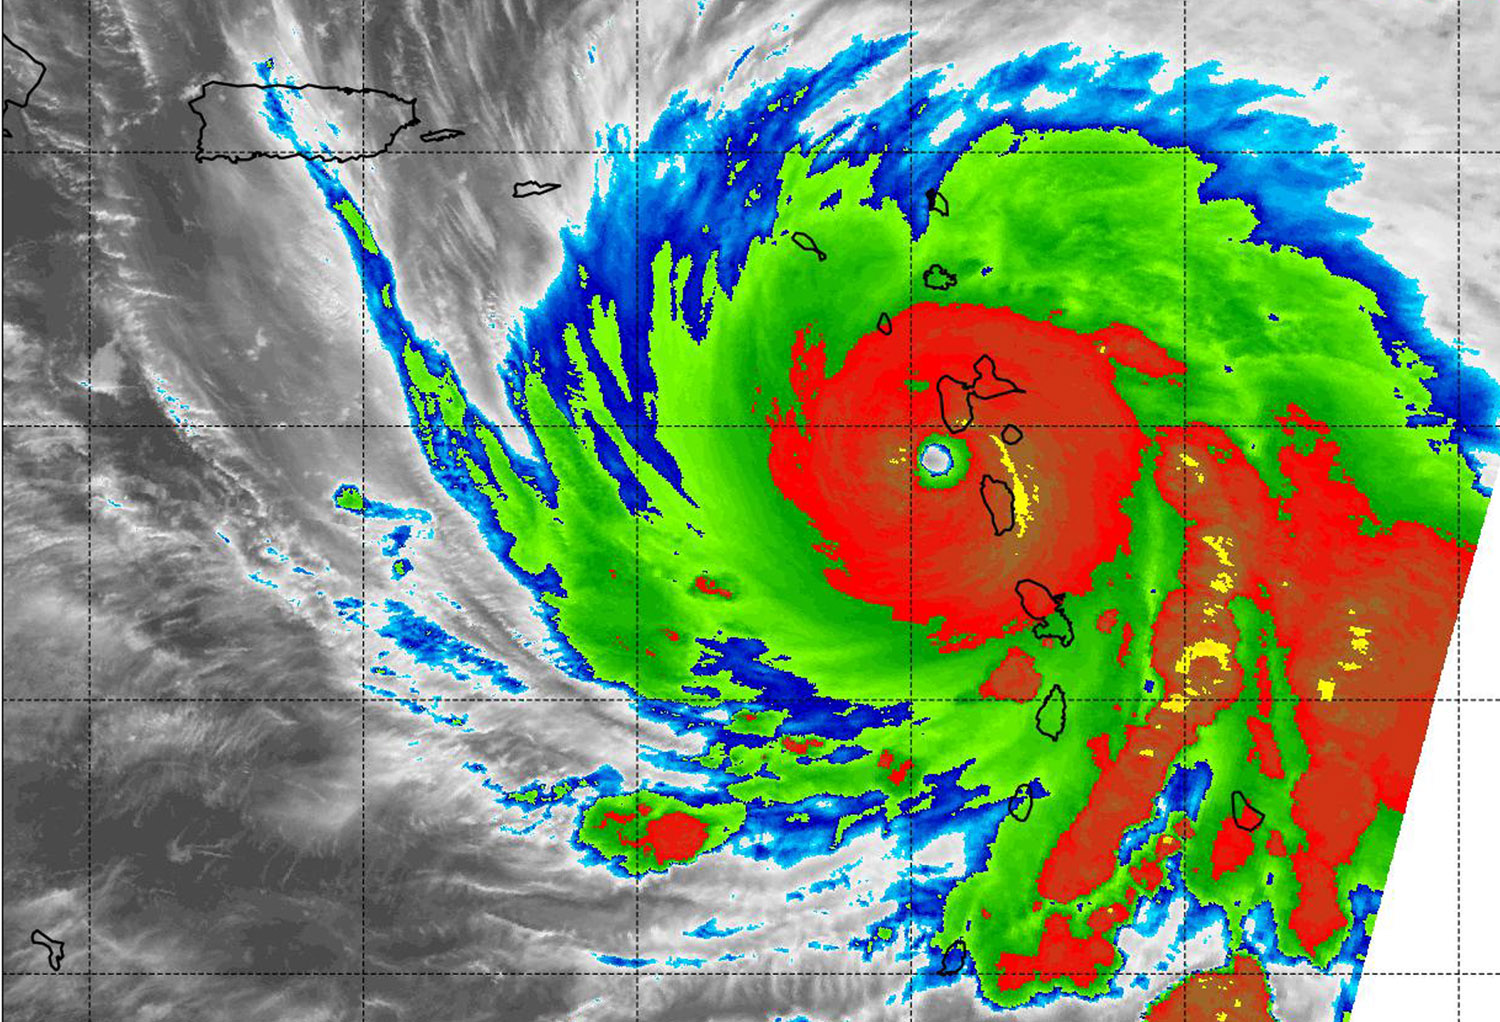 MODIS image of Maria with cloud temperatures indicated in reds, blues, and greens.